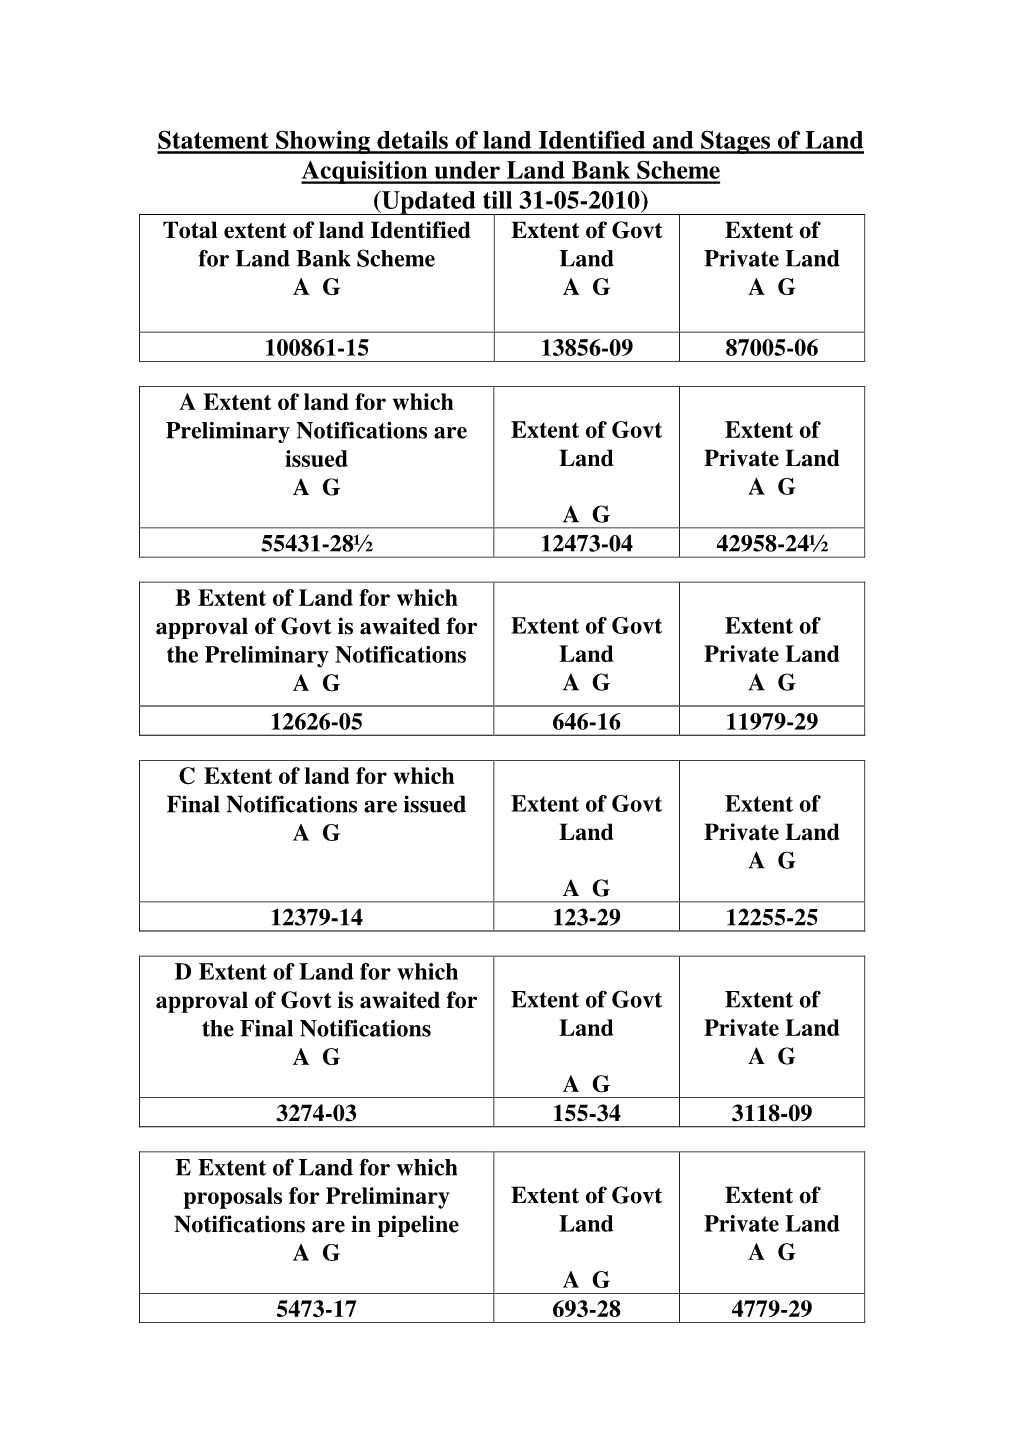 Statement Showing Details of Land Identified and Stages of Land Acquisition Under Land Bank Scheme (Updated Till 31-05-2010)